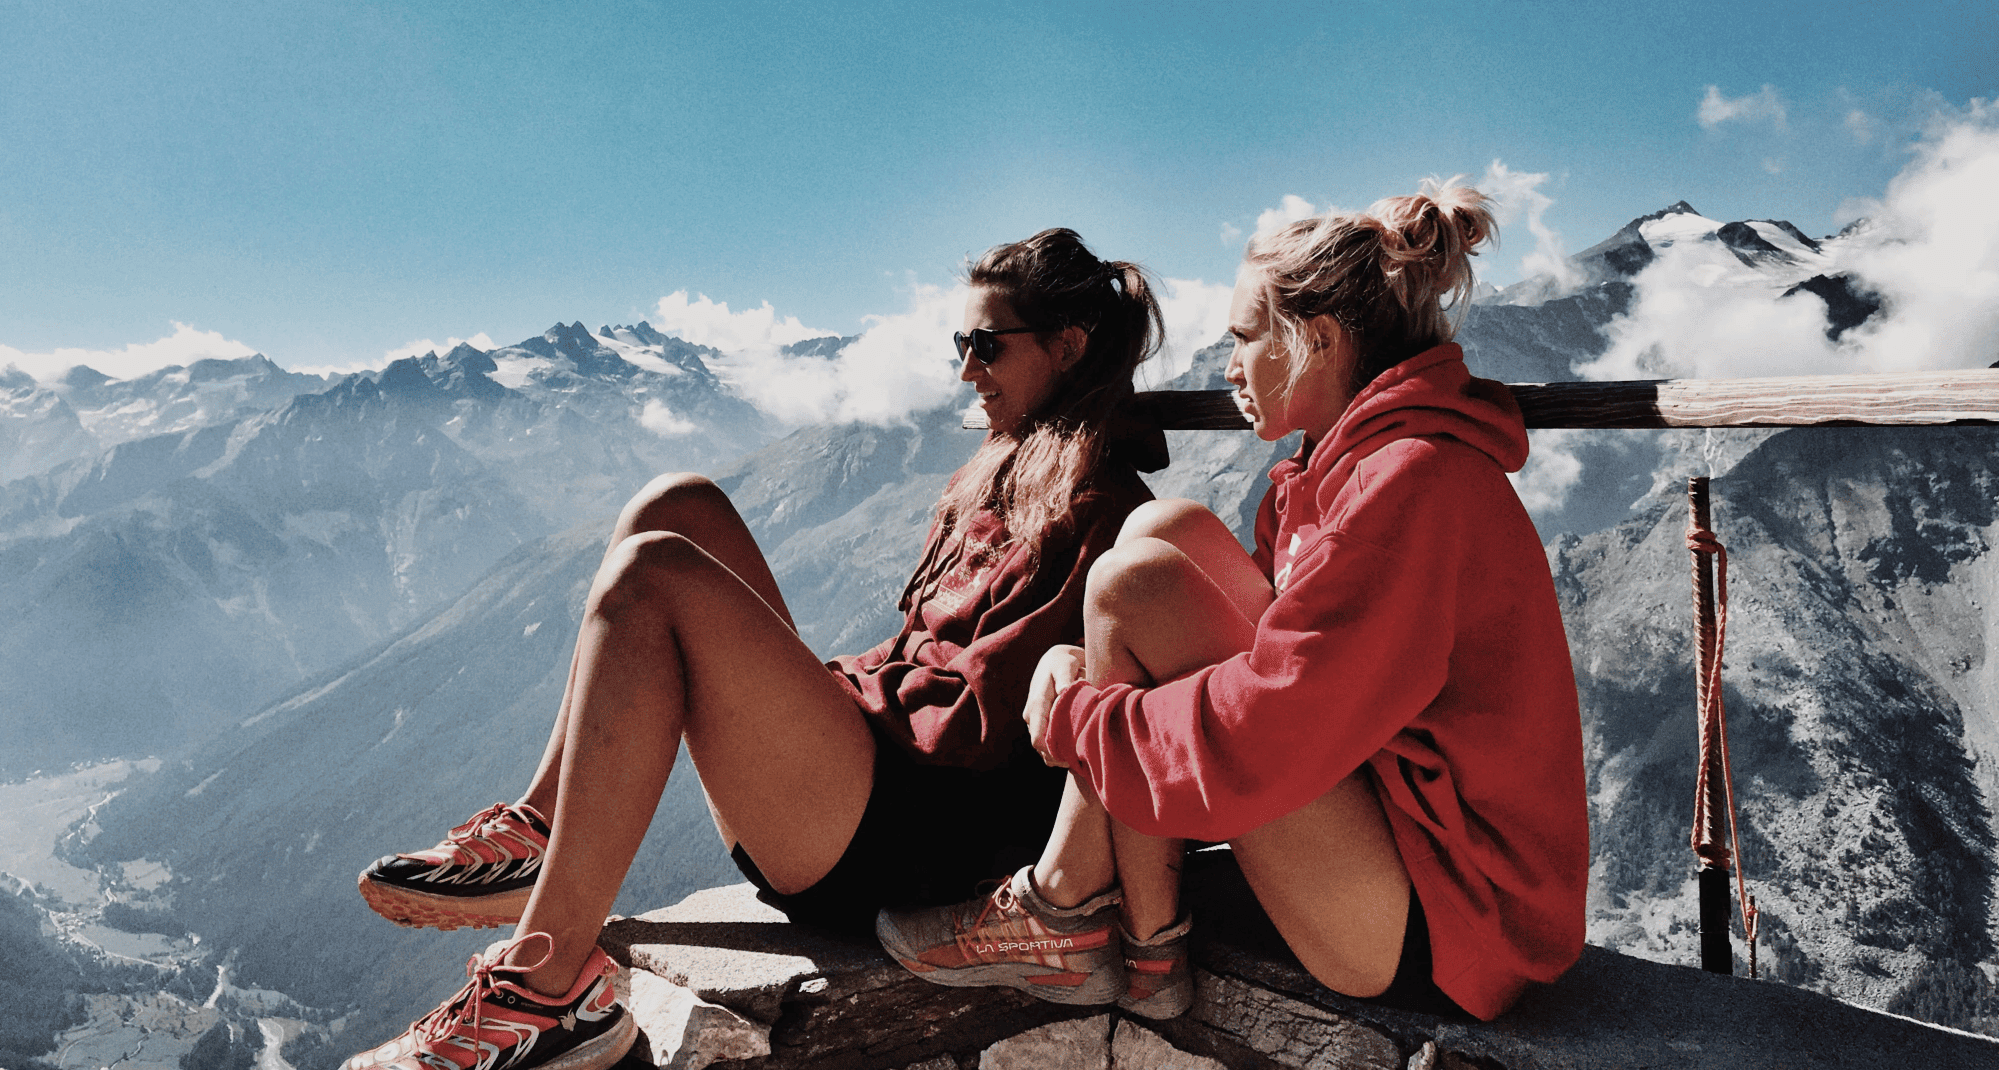 Two women sit on the edge of a mountain summit, and look out over the view.